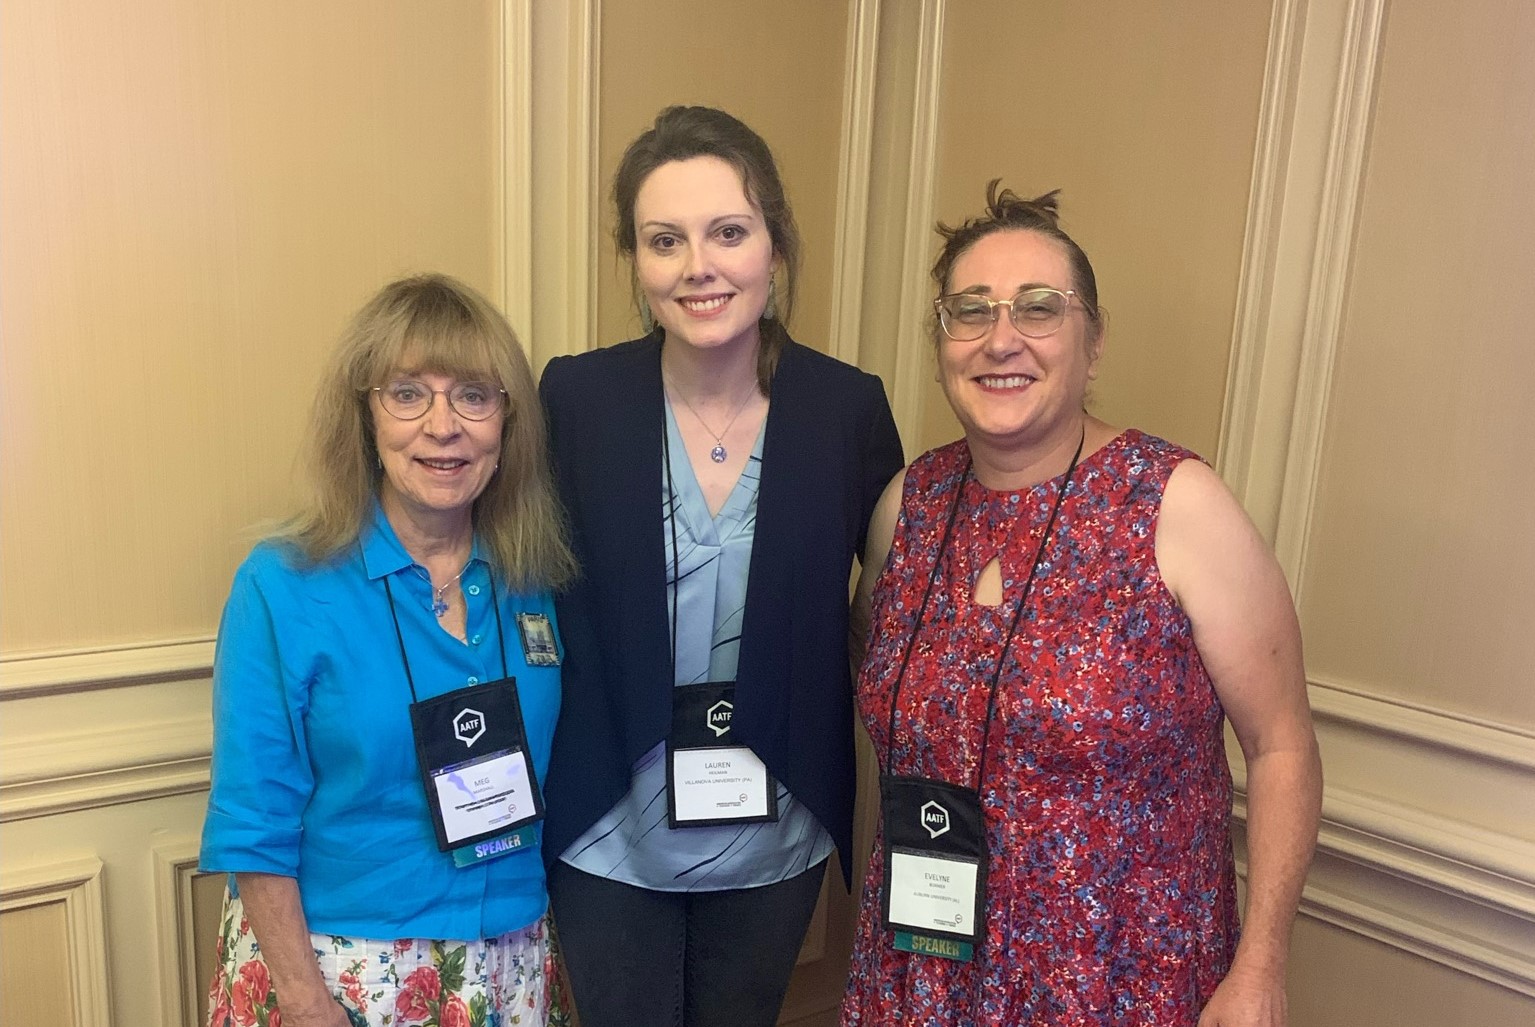 Meg Marshall, Lauren Heilman and Evelyne Bornier at the AATF convention in New Orleans